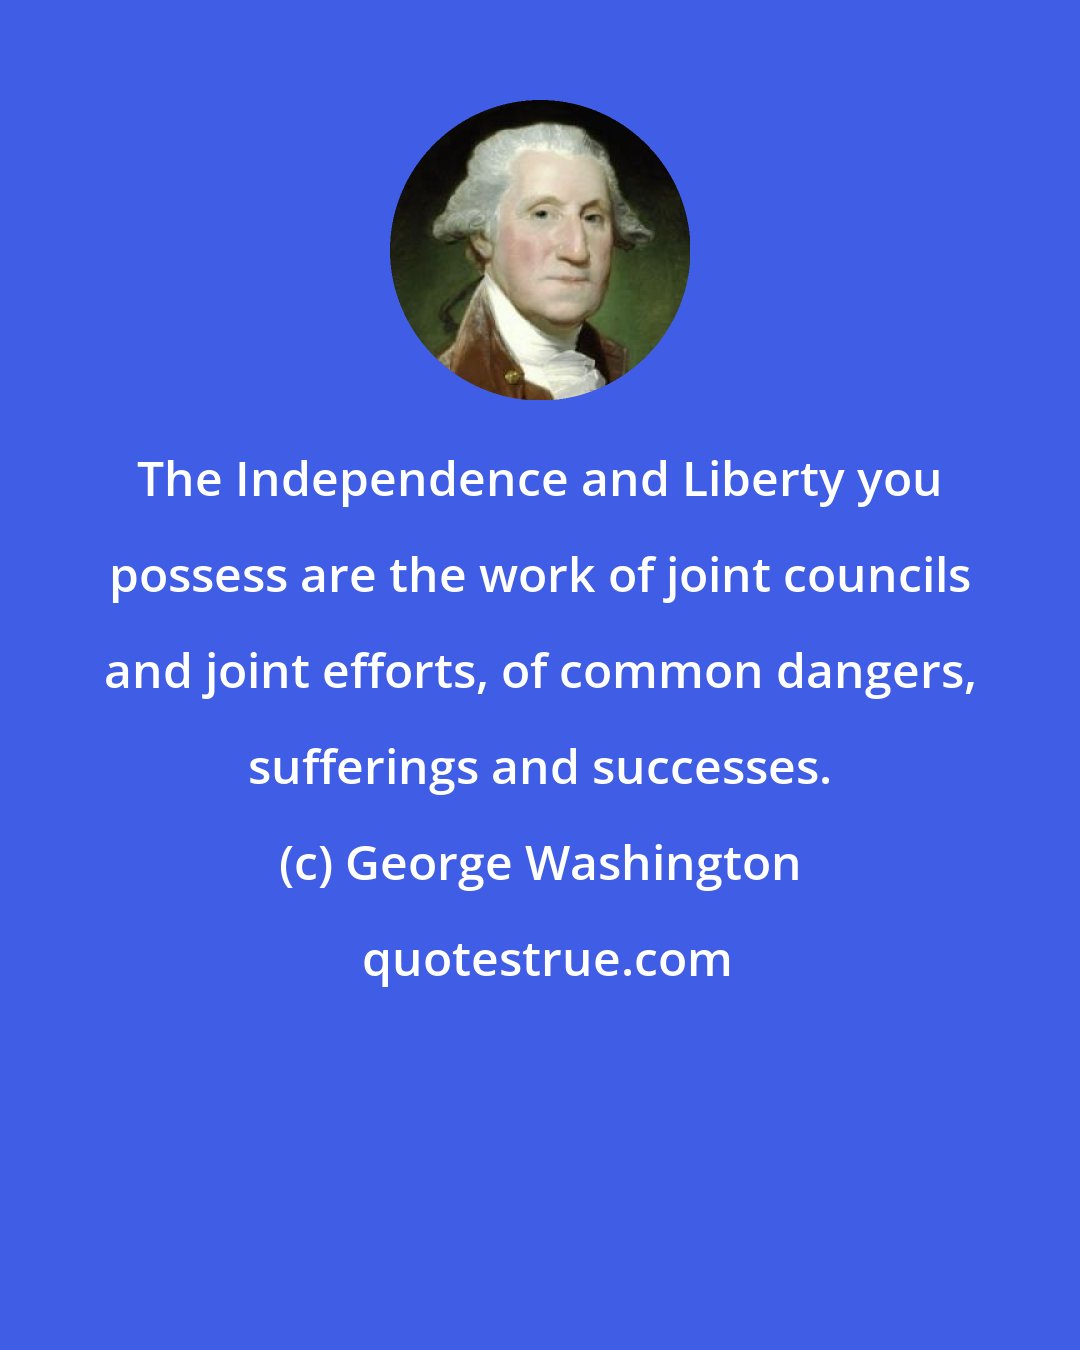 George Washington: The Independence and Liberty you possess are the work of joint councils and joint efforts, of common dangers, sufferings and successes.